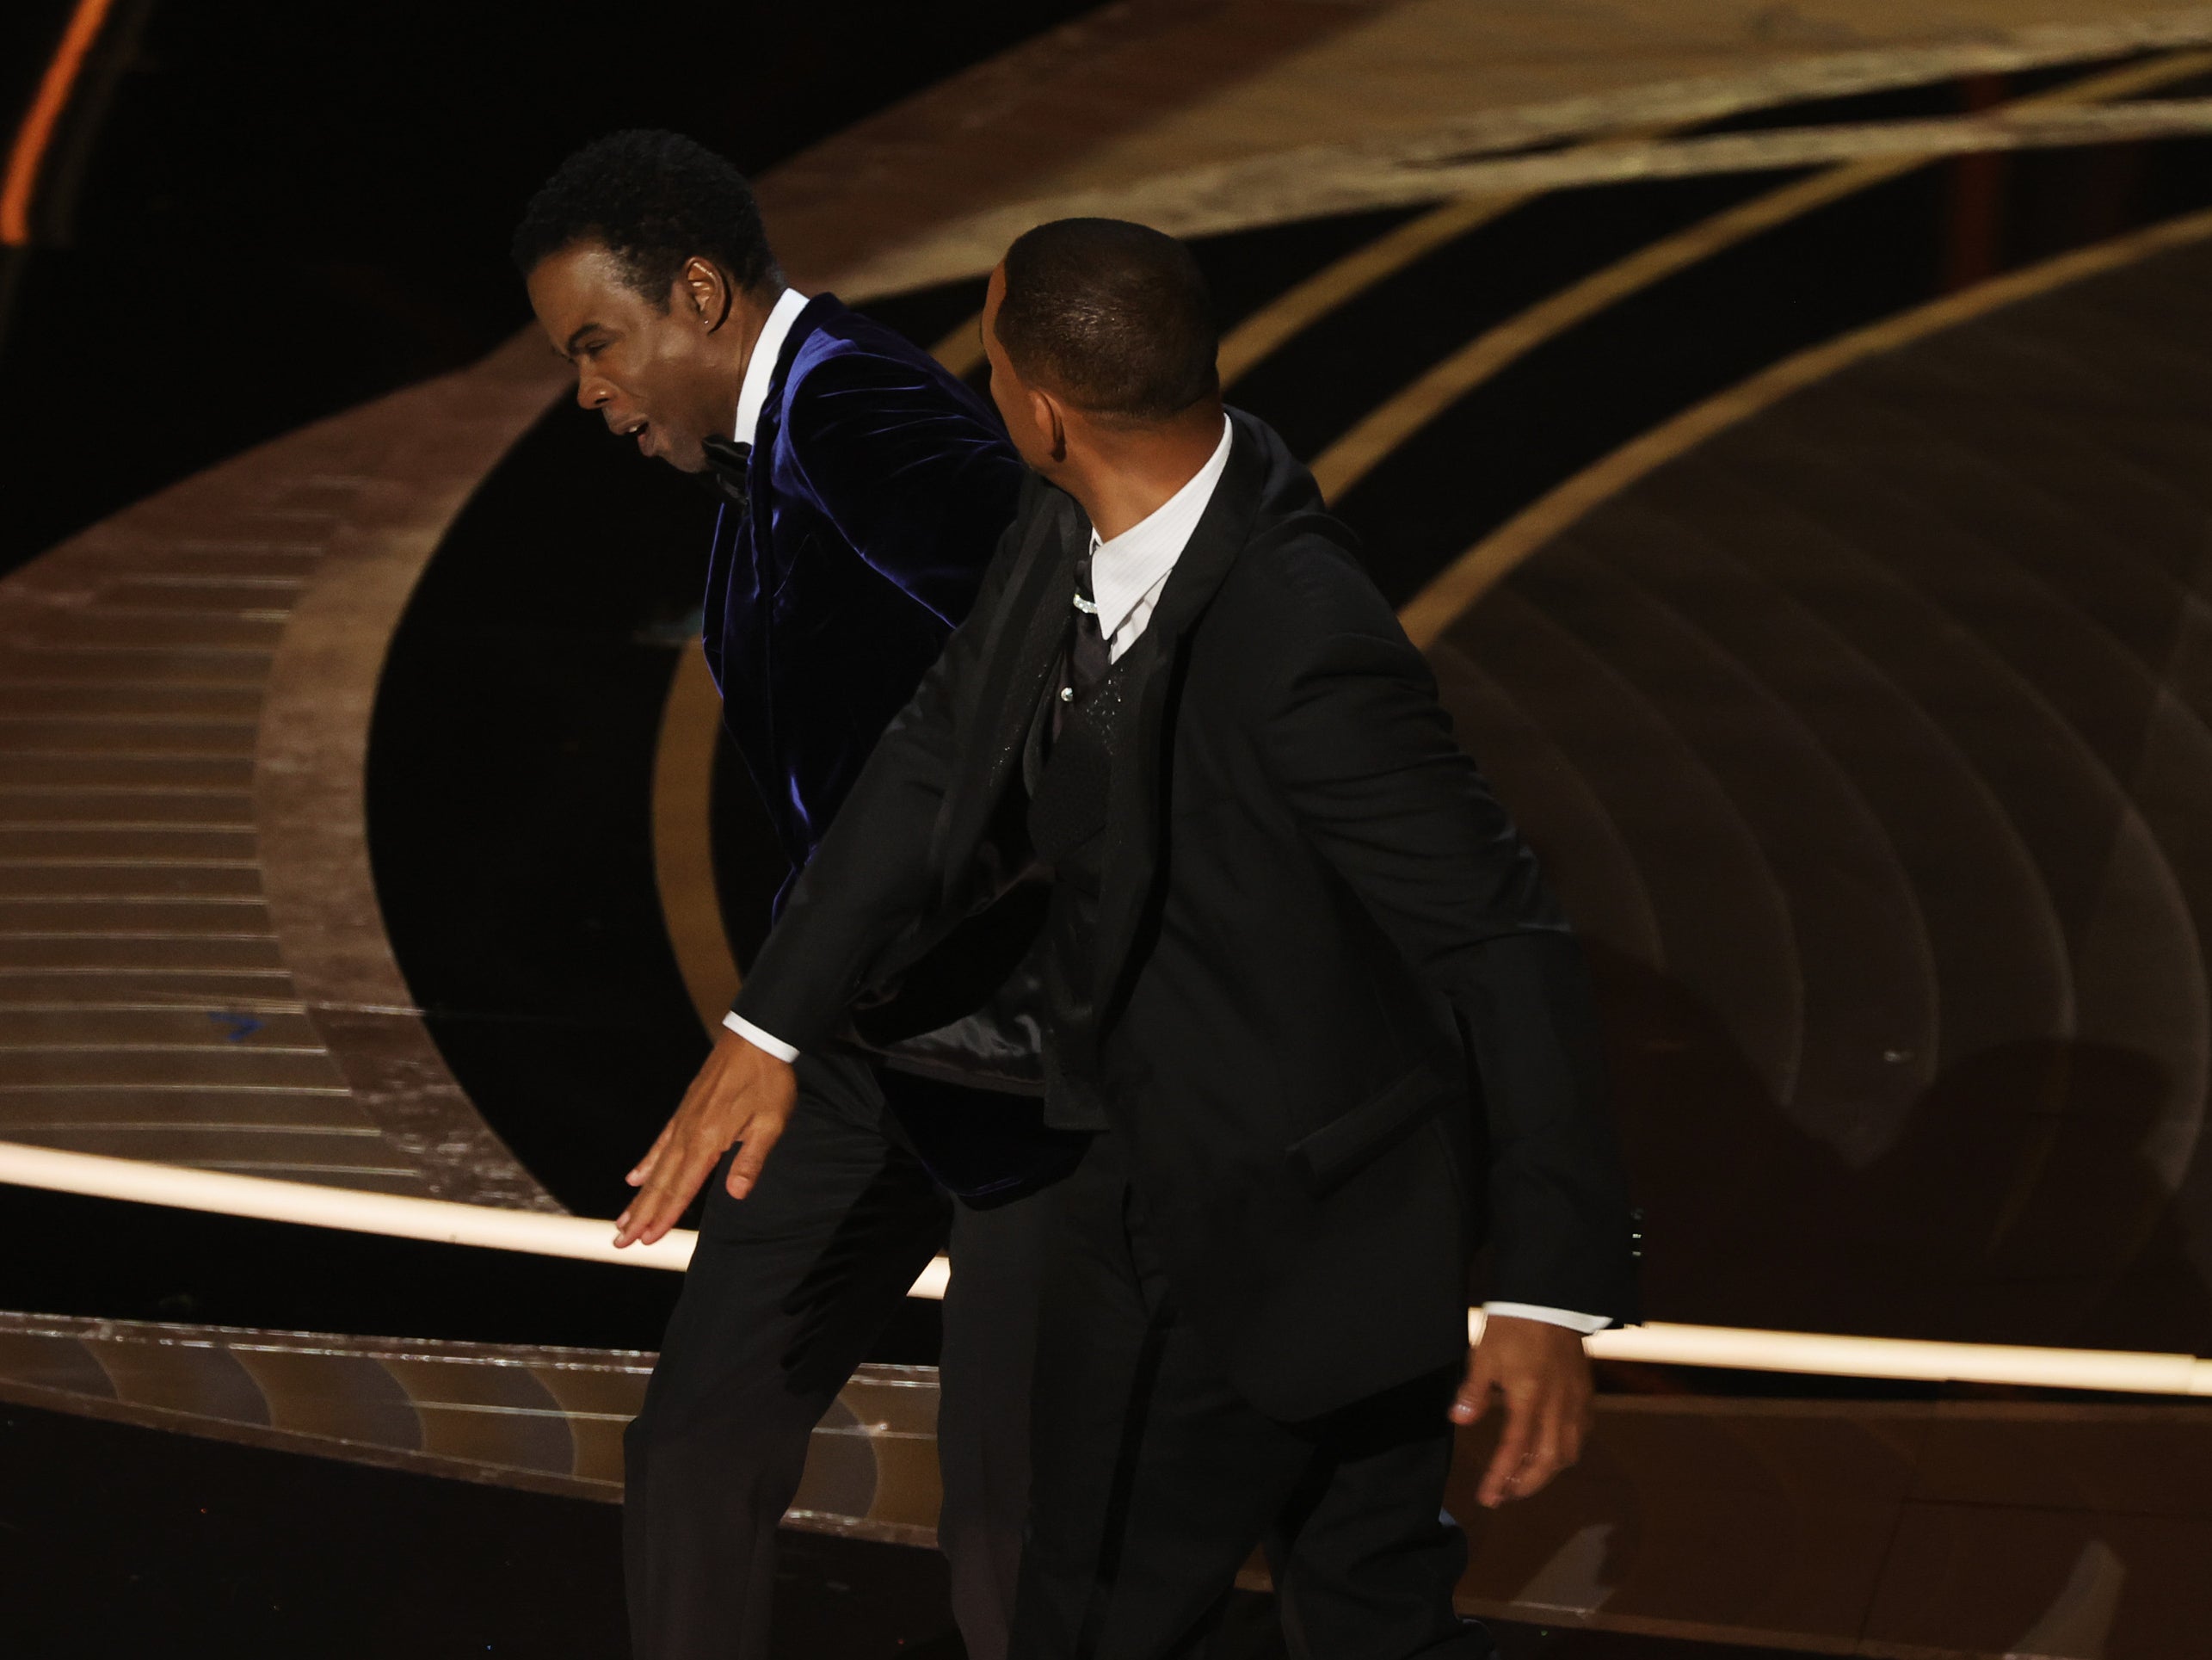 The moment when Will Smith struck Chris Rock onstage at the 94th Academy Awards on Sunday (27 March)